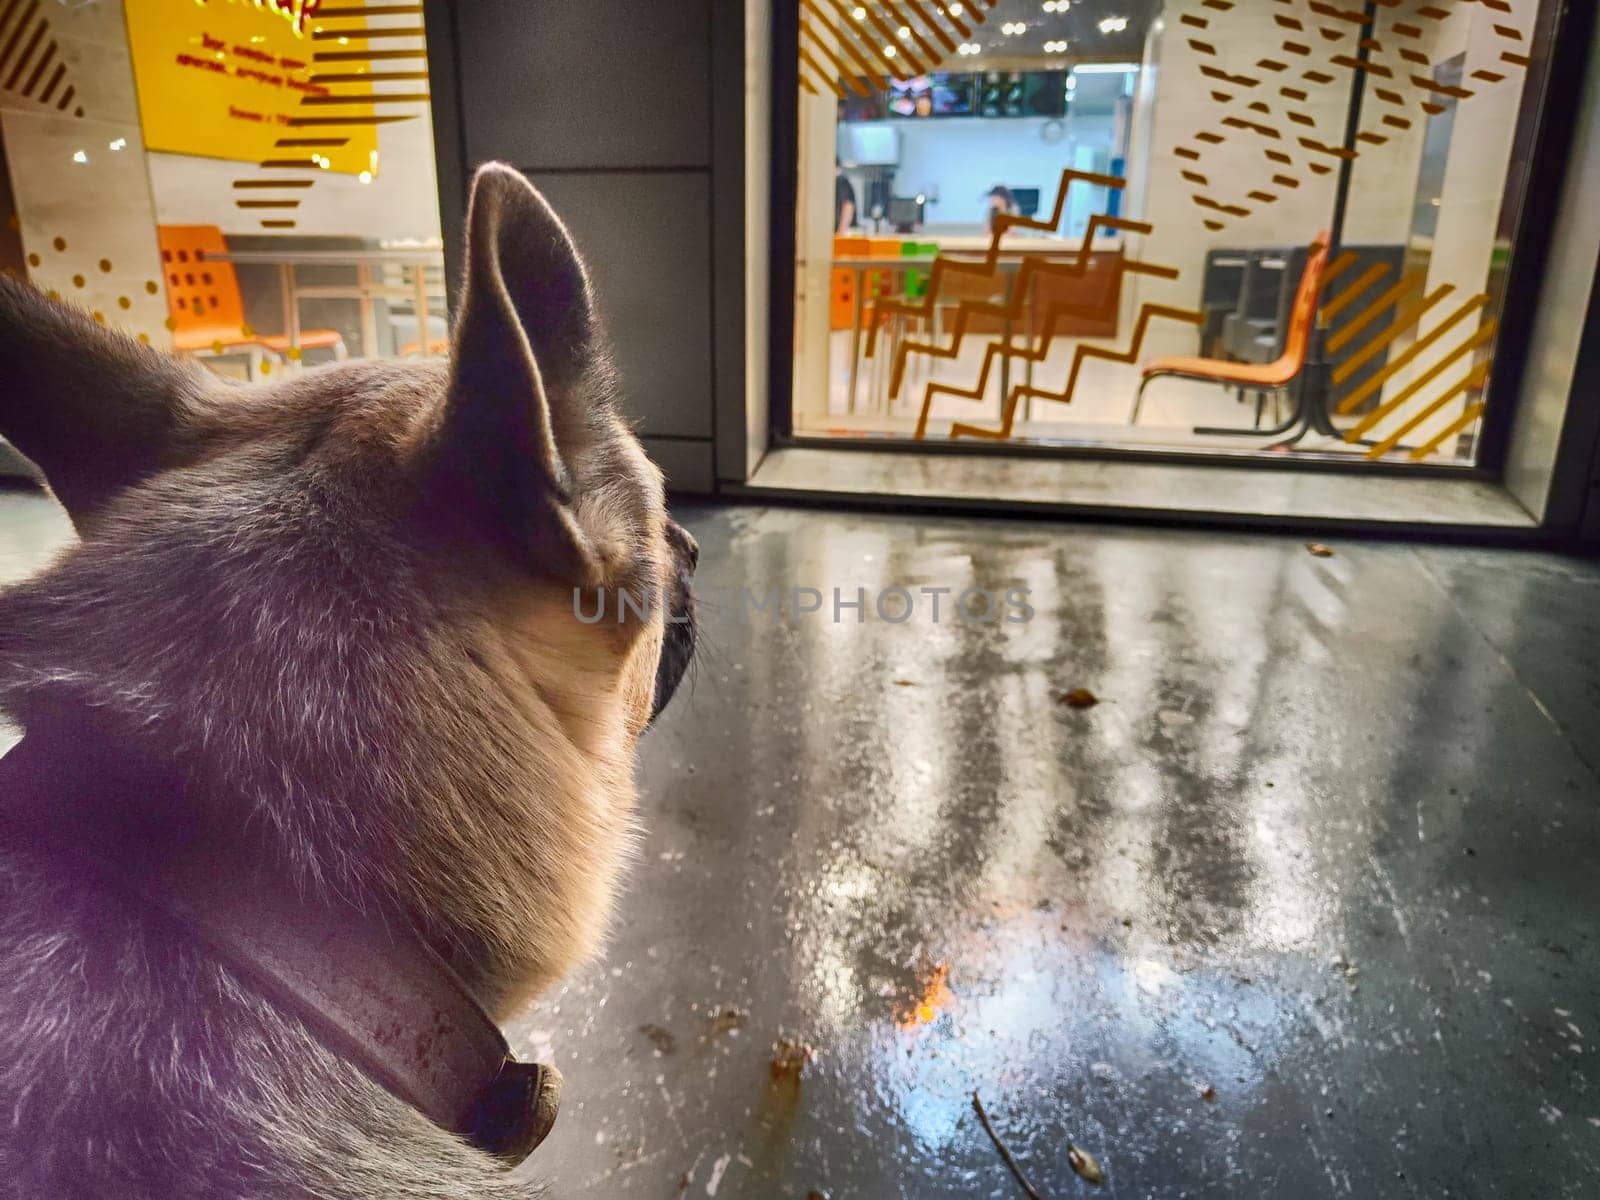 Lost shepherd dog near the window of a restaurant or store. A sad frozen hungry pet. Homeless animal